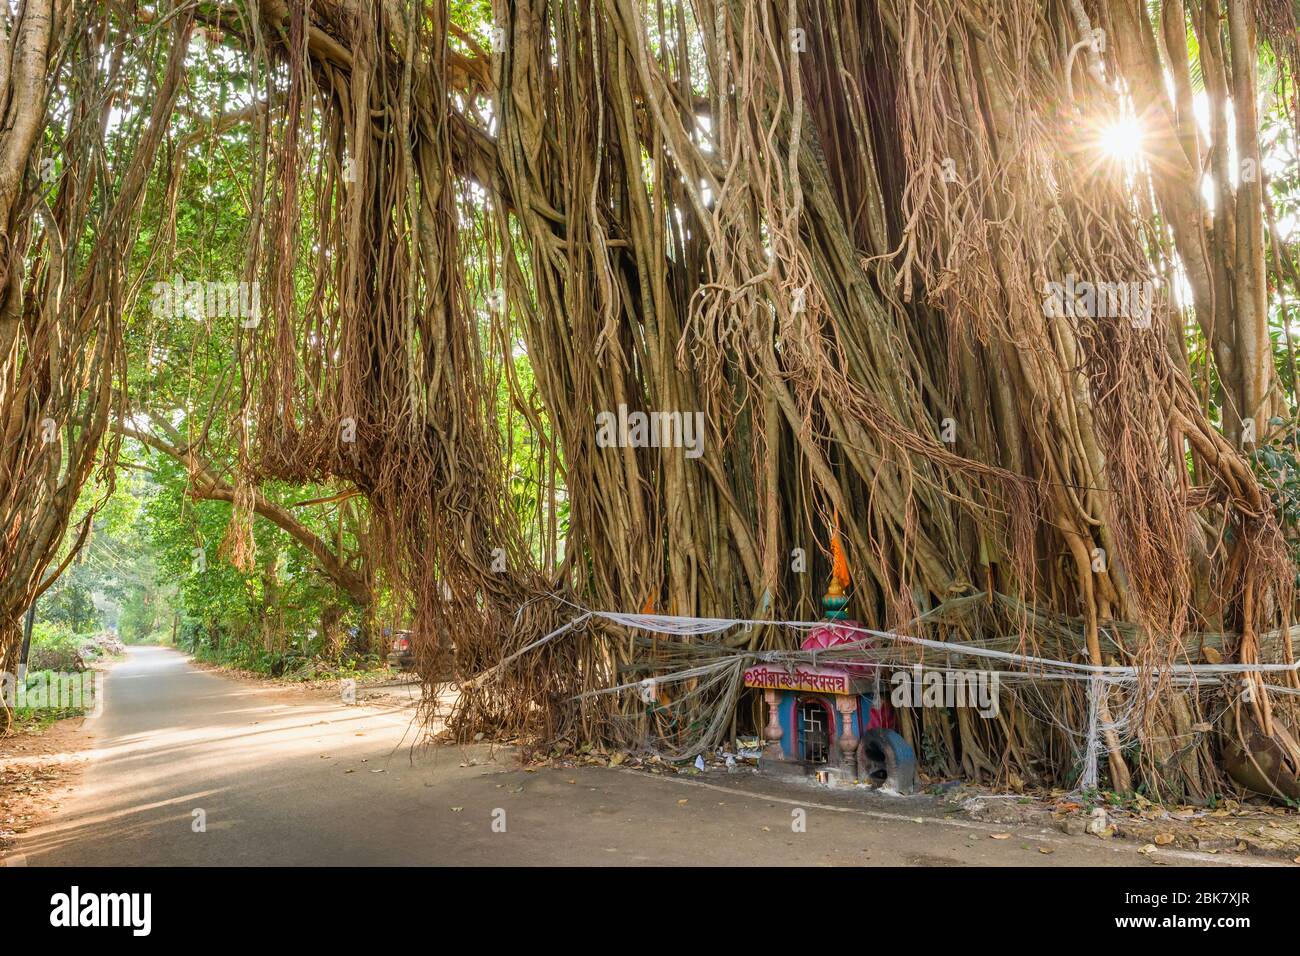 Country road under the big banyan tree in Goa state, India Stock Photo